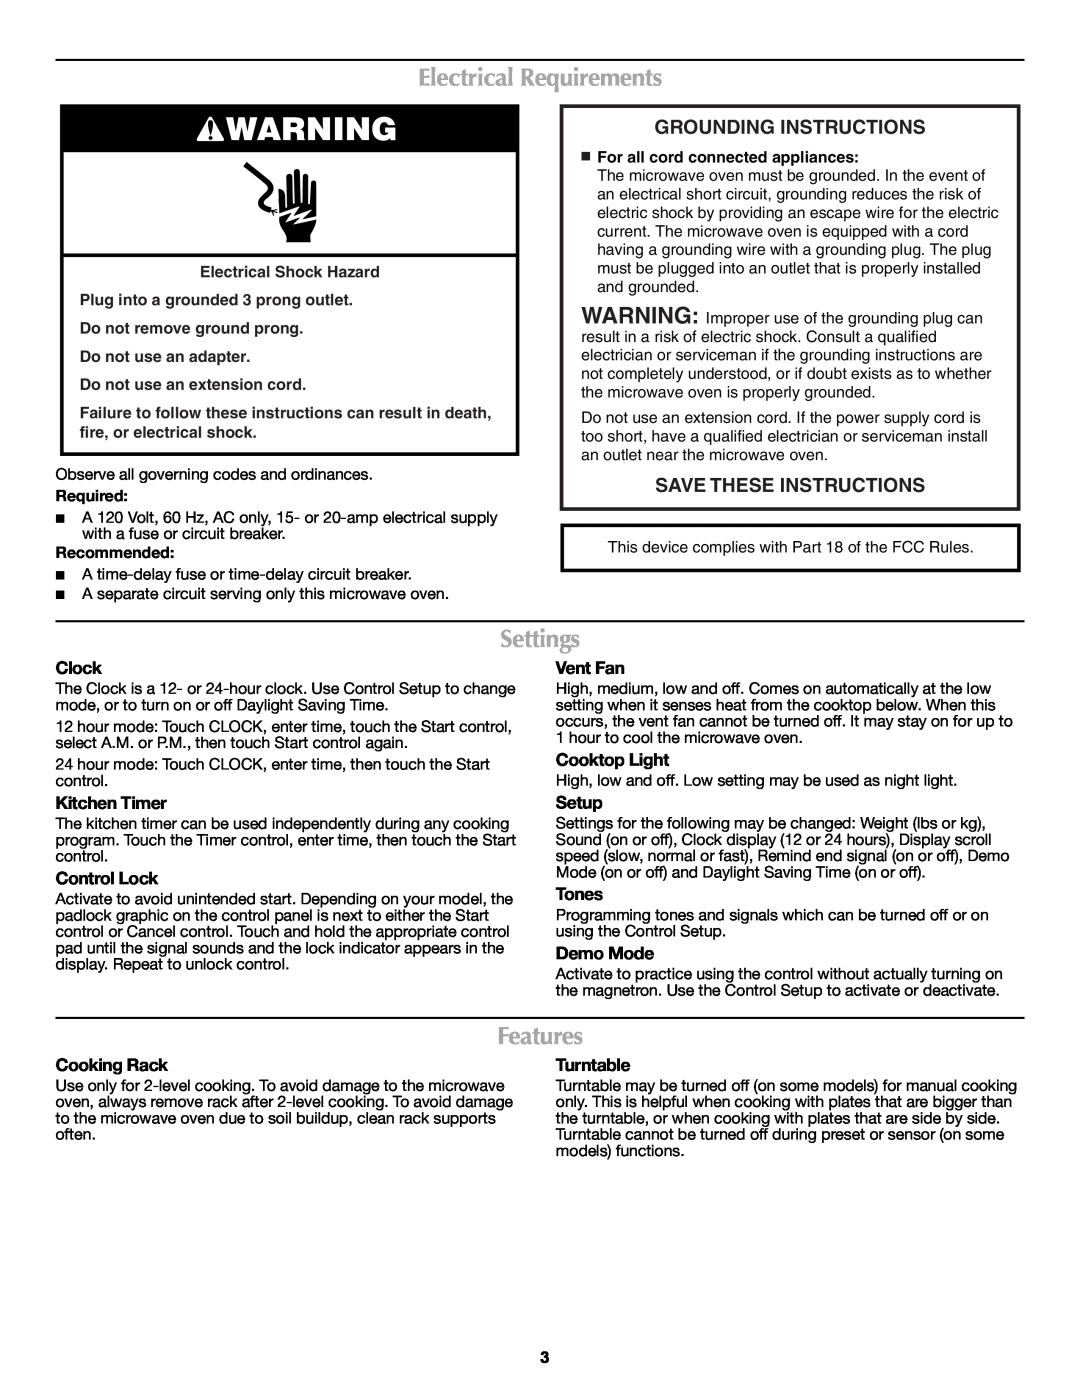 Maytag W10188236A, W10188944A Electrical Requirements, Settings, Features, Grounding Instructions, Save These Instructions 